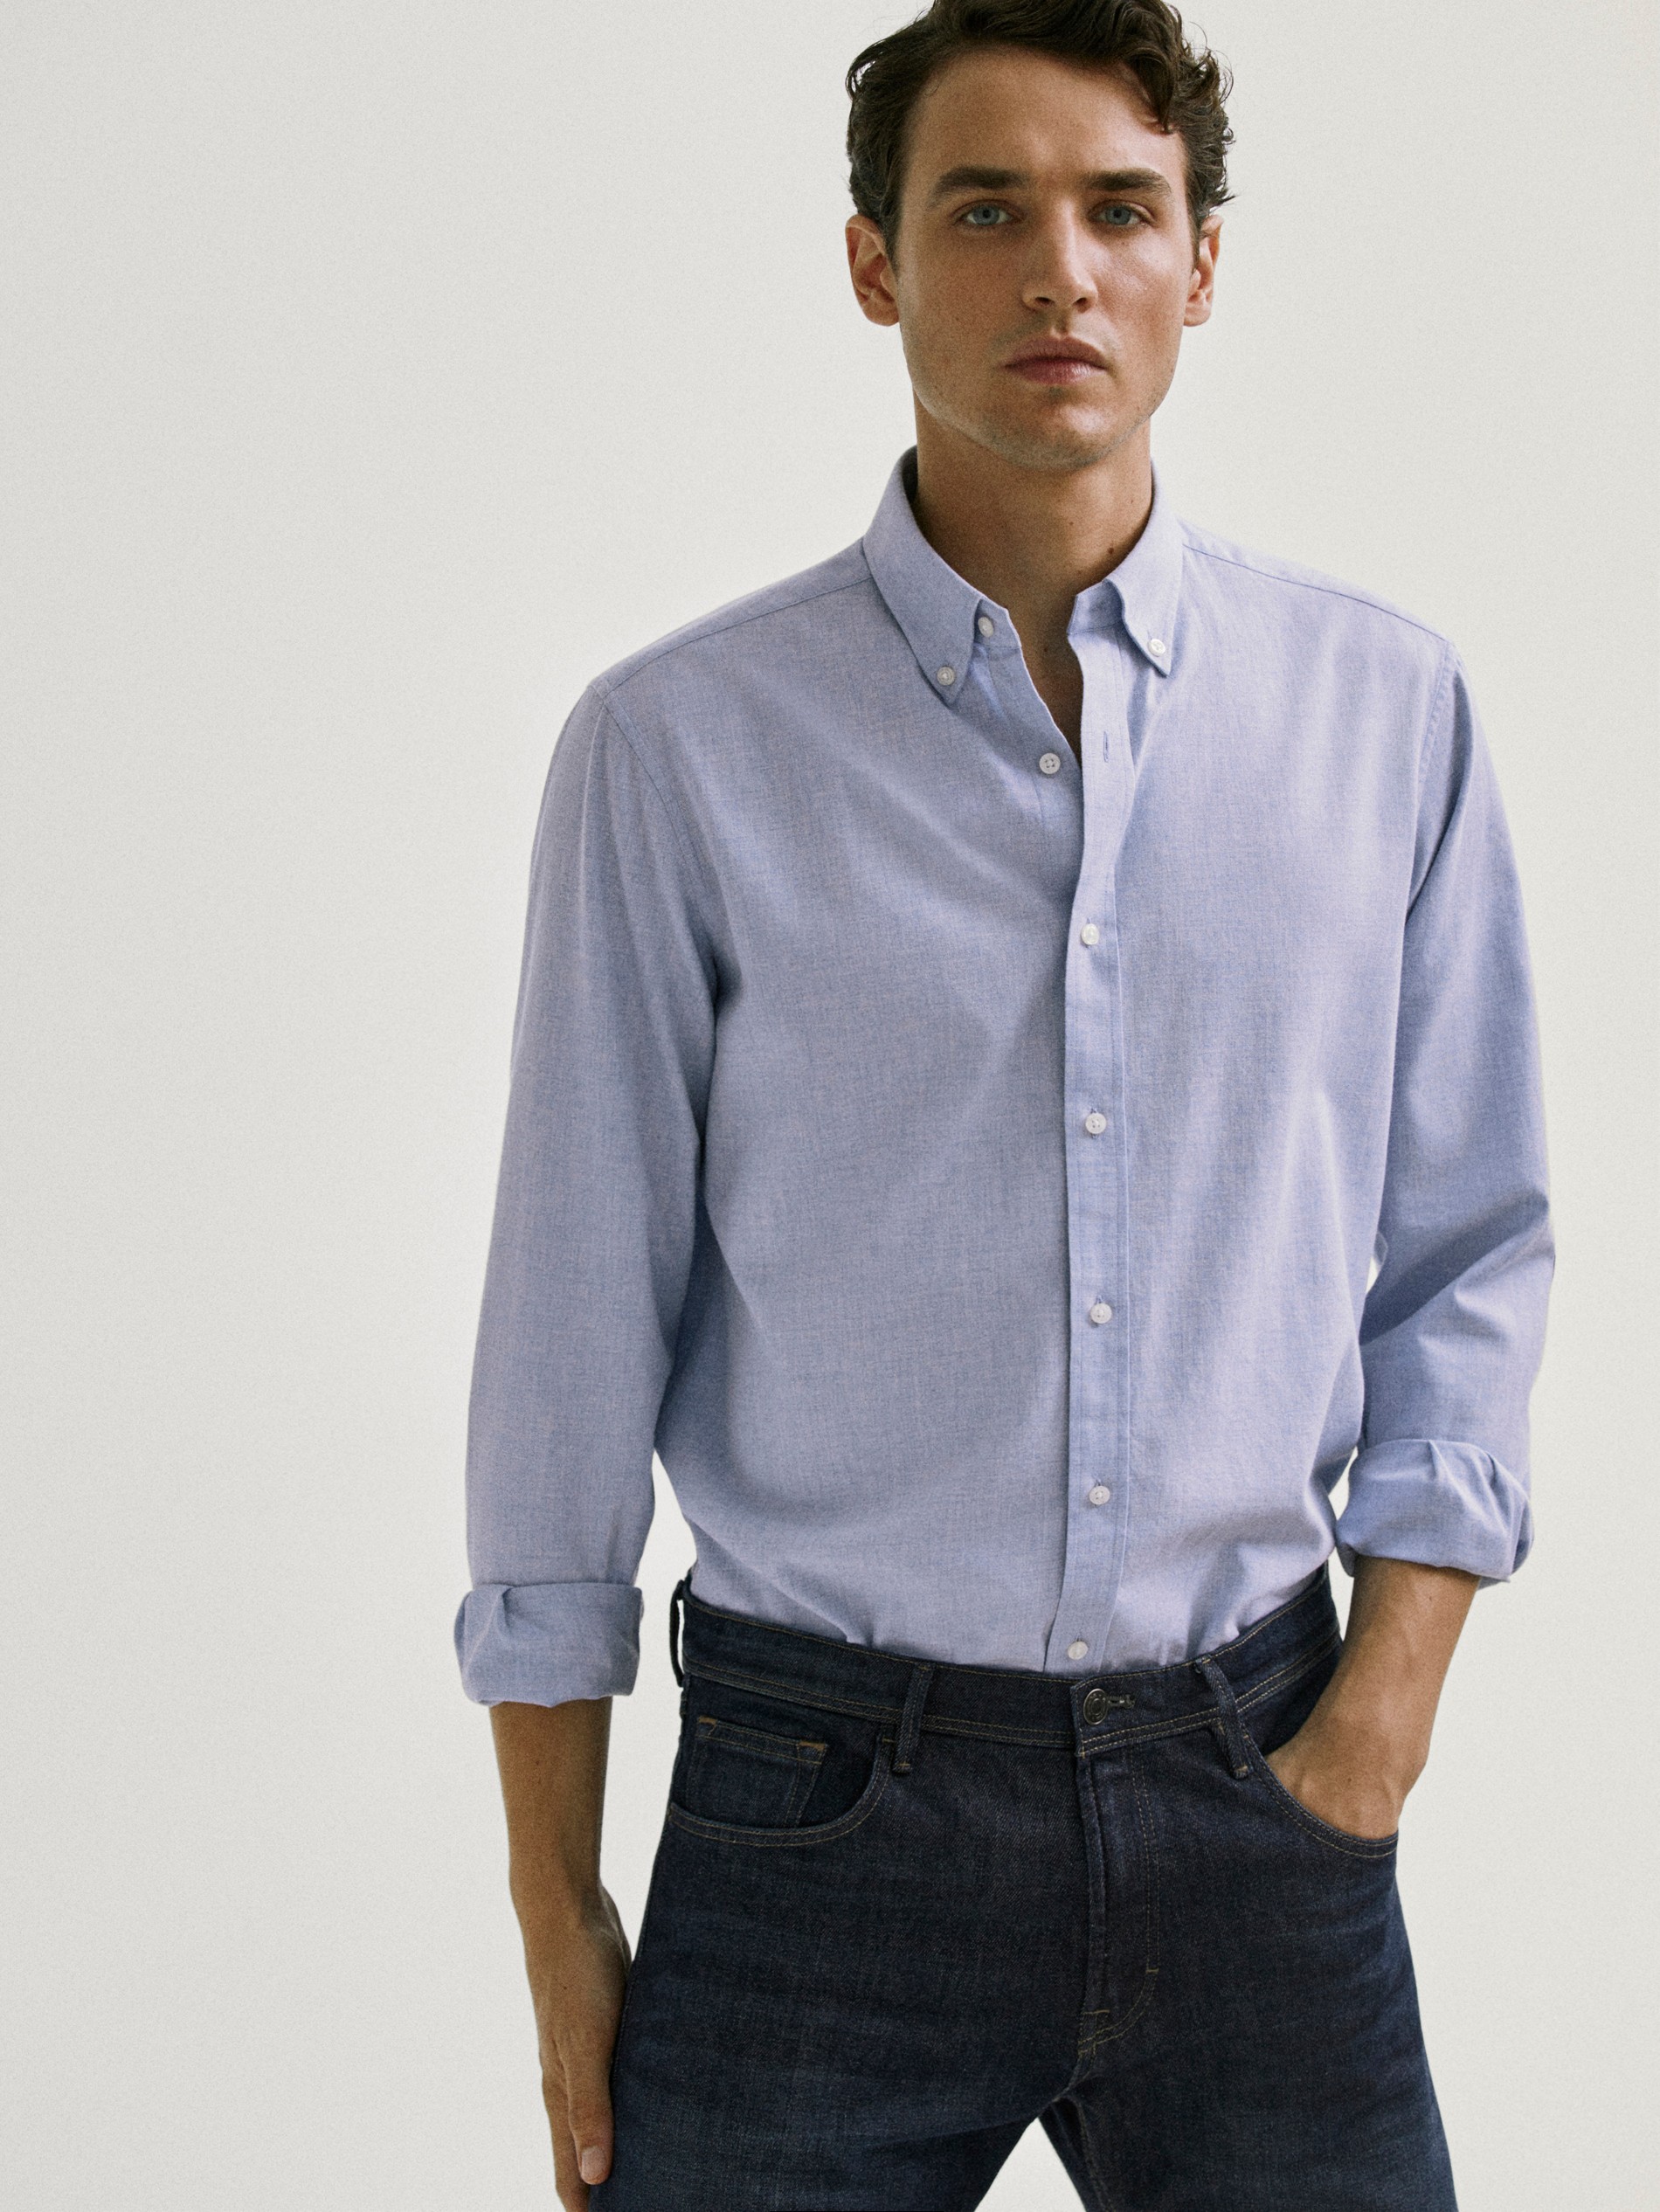 mens denim shirt with elbow patches